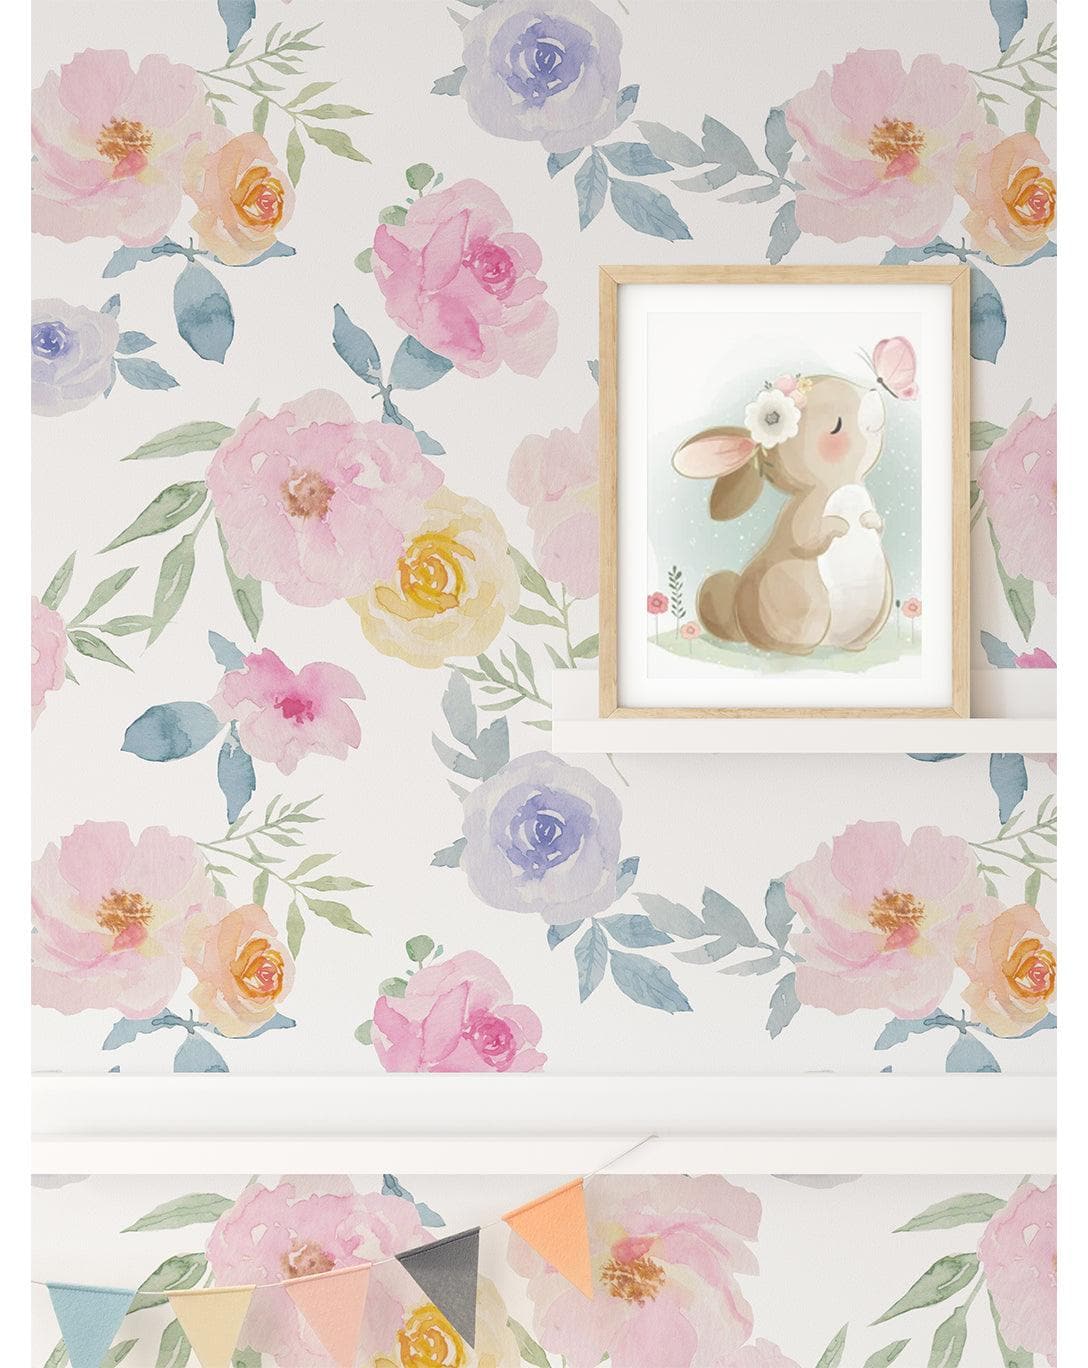 Floral Watercolor Pink Yellow Blue Roses Retro Flowers Wallpaper Floral Watercolor Pink Yellow Blue Roses Retro Flowers Wallpaper Floral Watercolor Pink Yellow Blue Roses Retro Flowers Wallpaper 